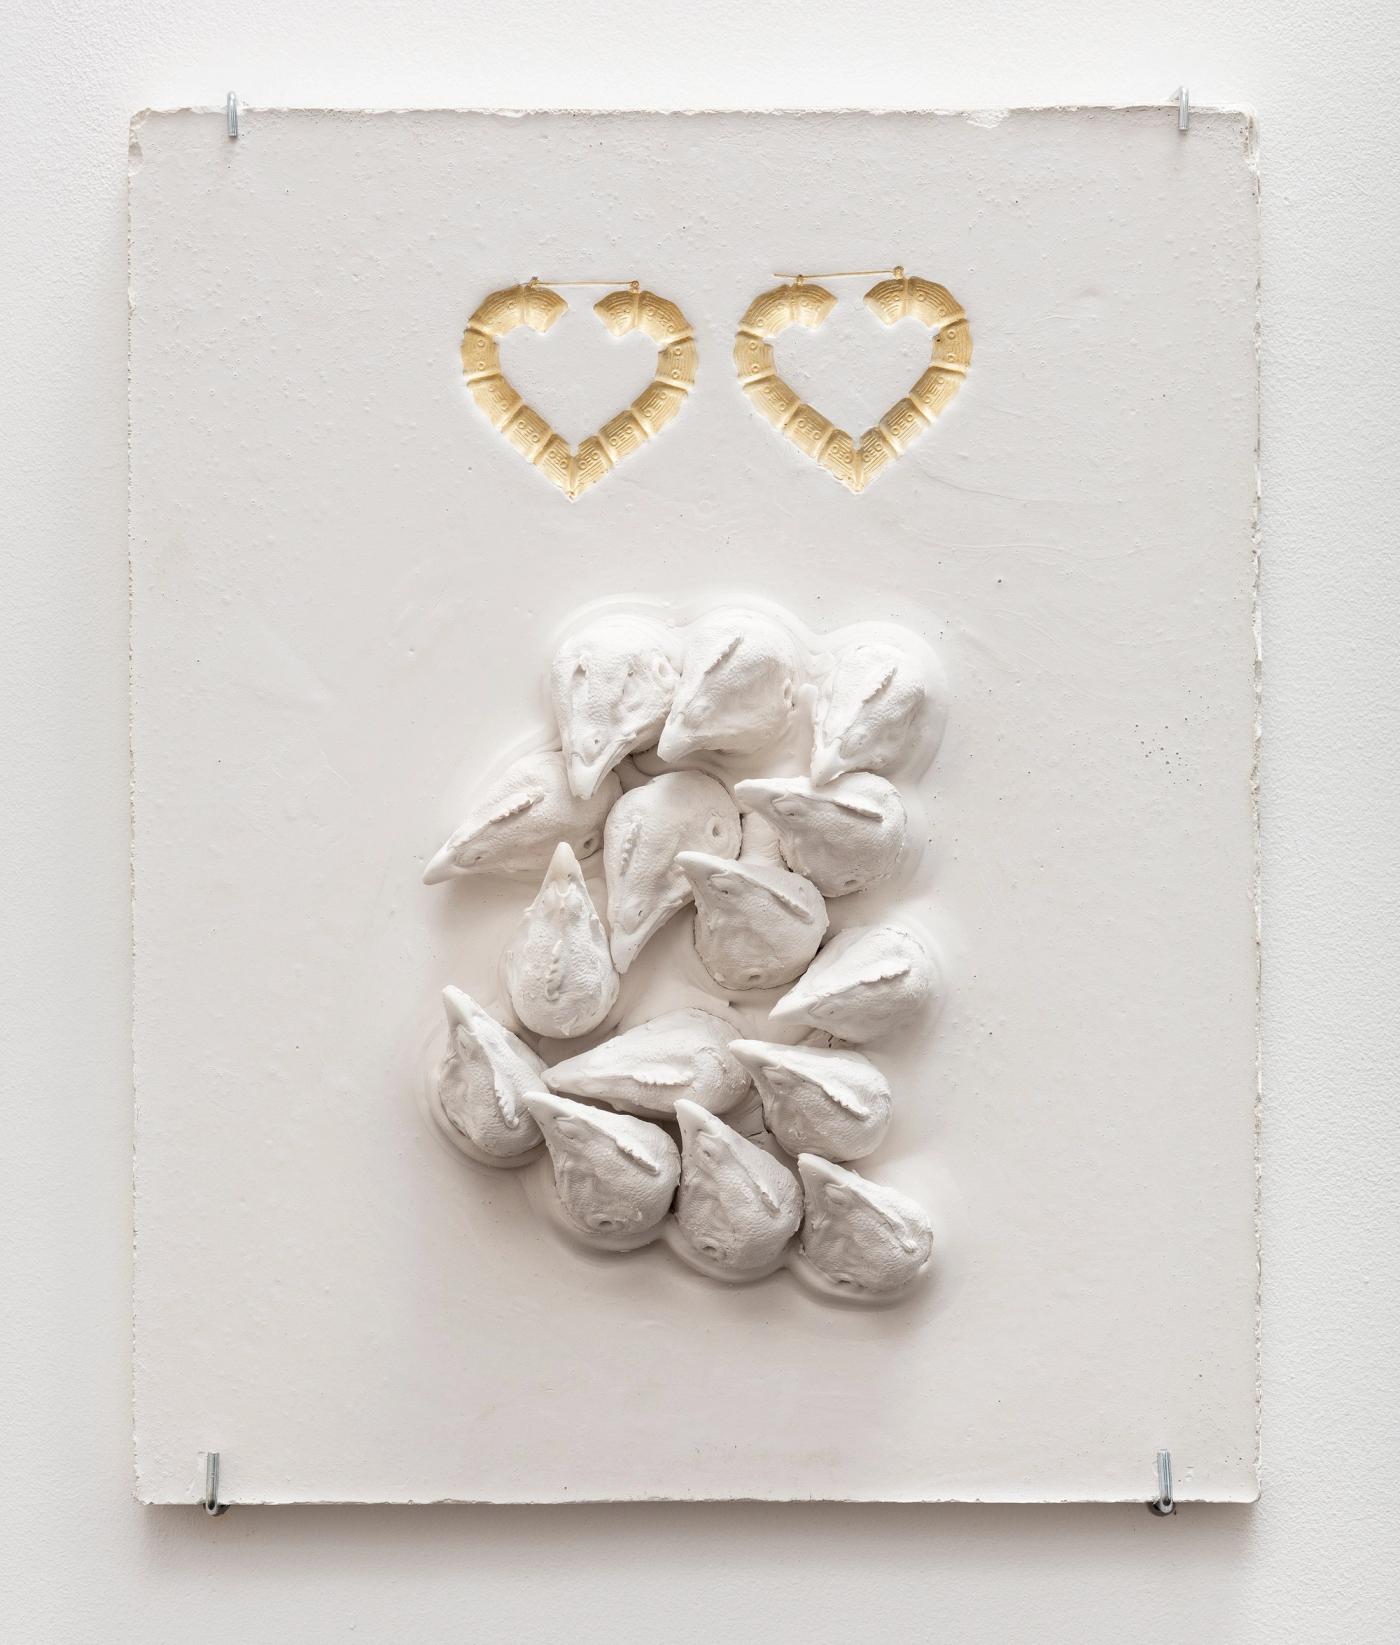 Image of Chickenheads and Heart Bamboo Earrings Sunken Relief, 2018: Plaster and acrylic